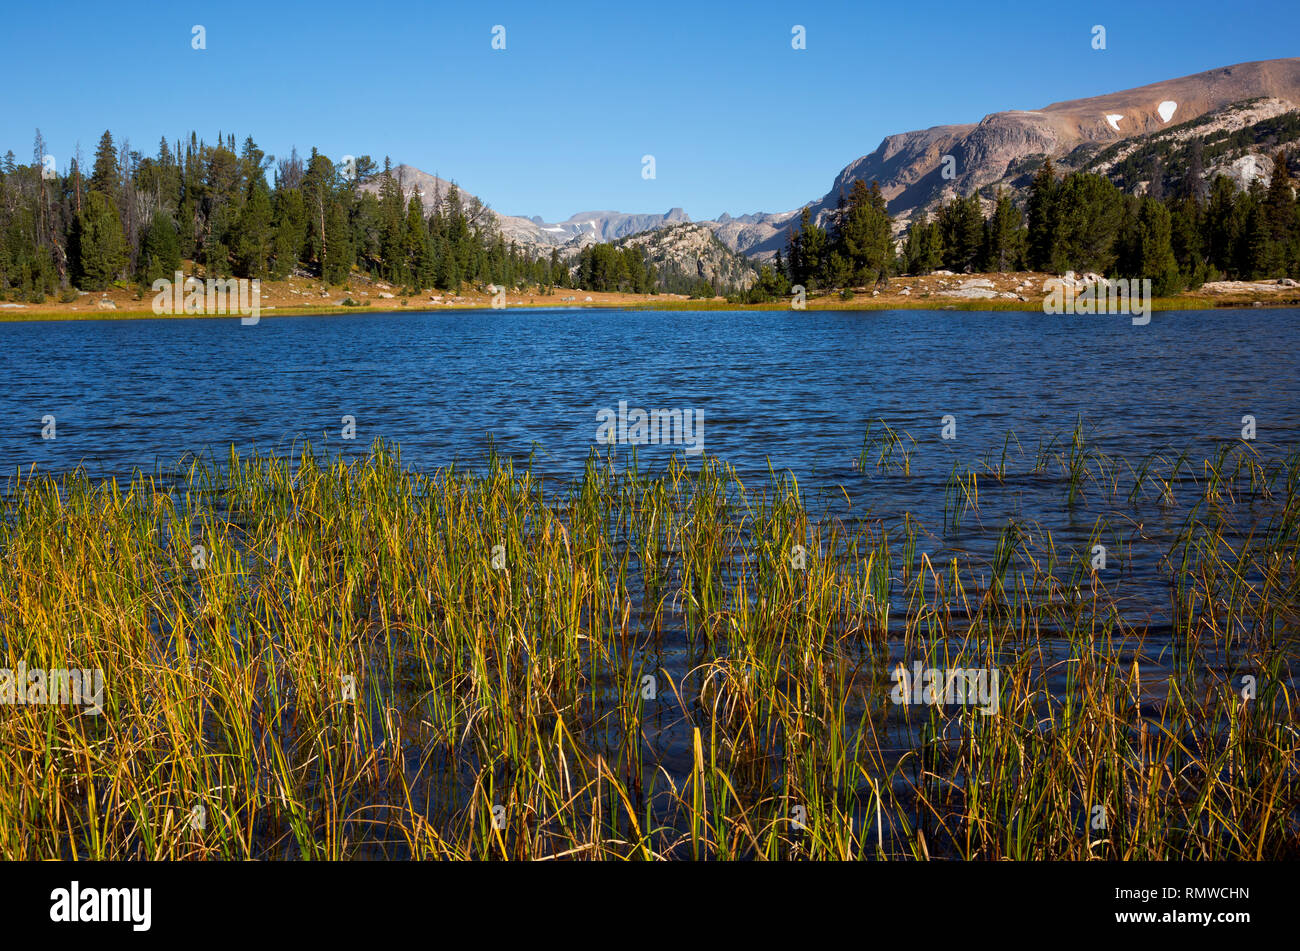 WY03756-00...WYOMING - Small lake along the Beartooth Highlakes Trail in the Beartooth Mountains area of the Shoshone National Forest. Stock Photo